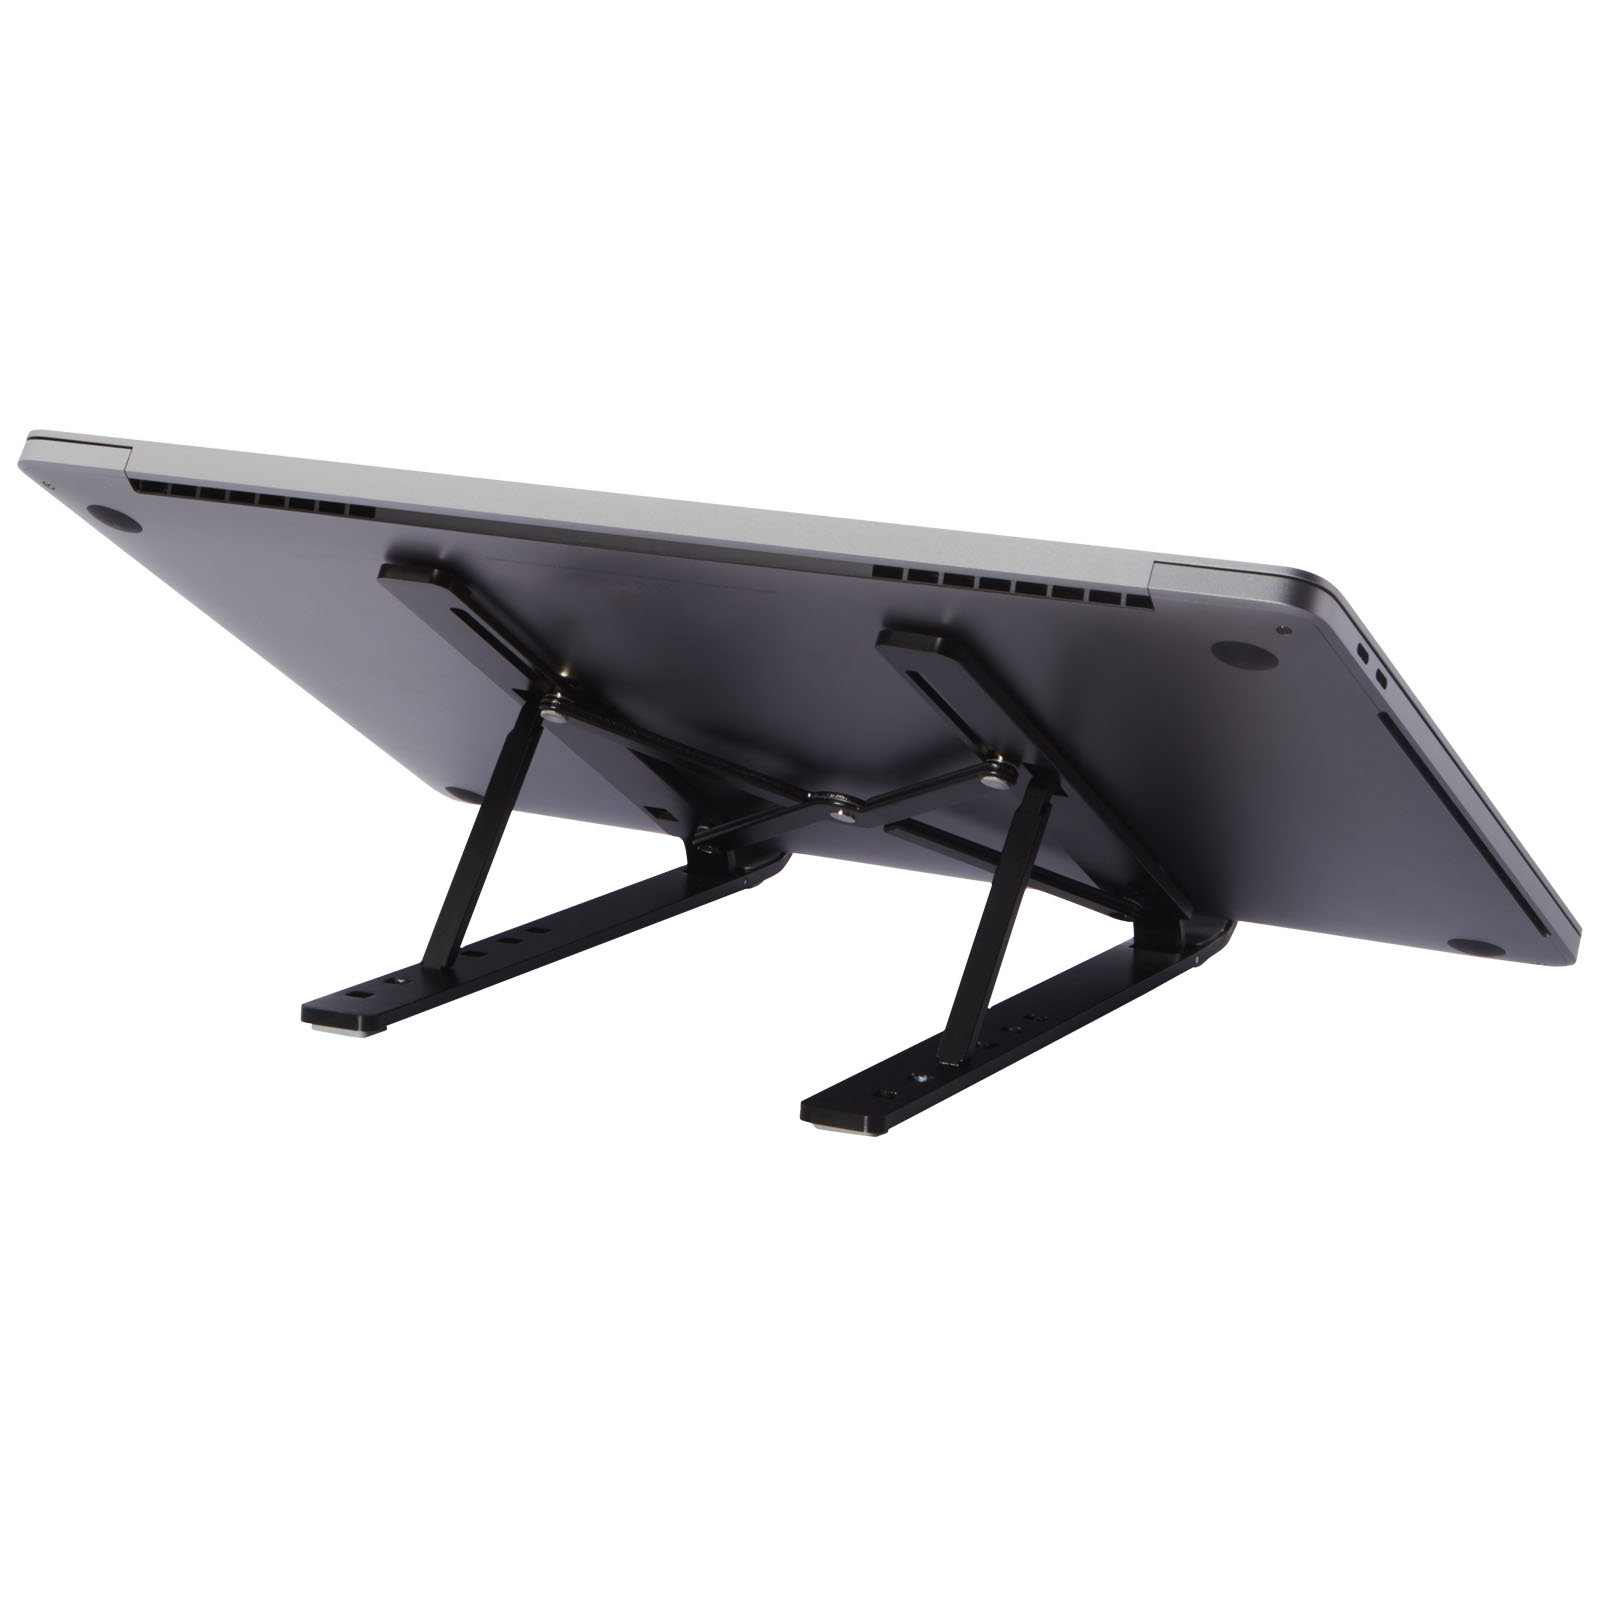 Advertising Stands & Holders - Rise foldable laptop stand - 3